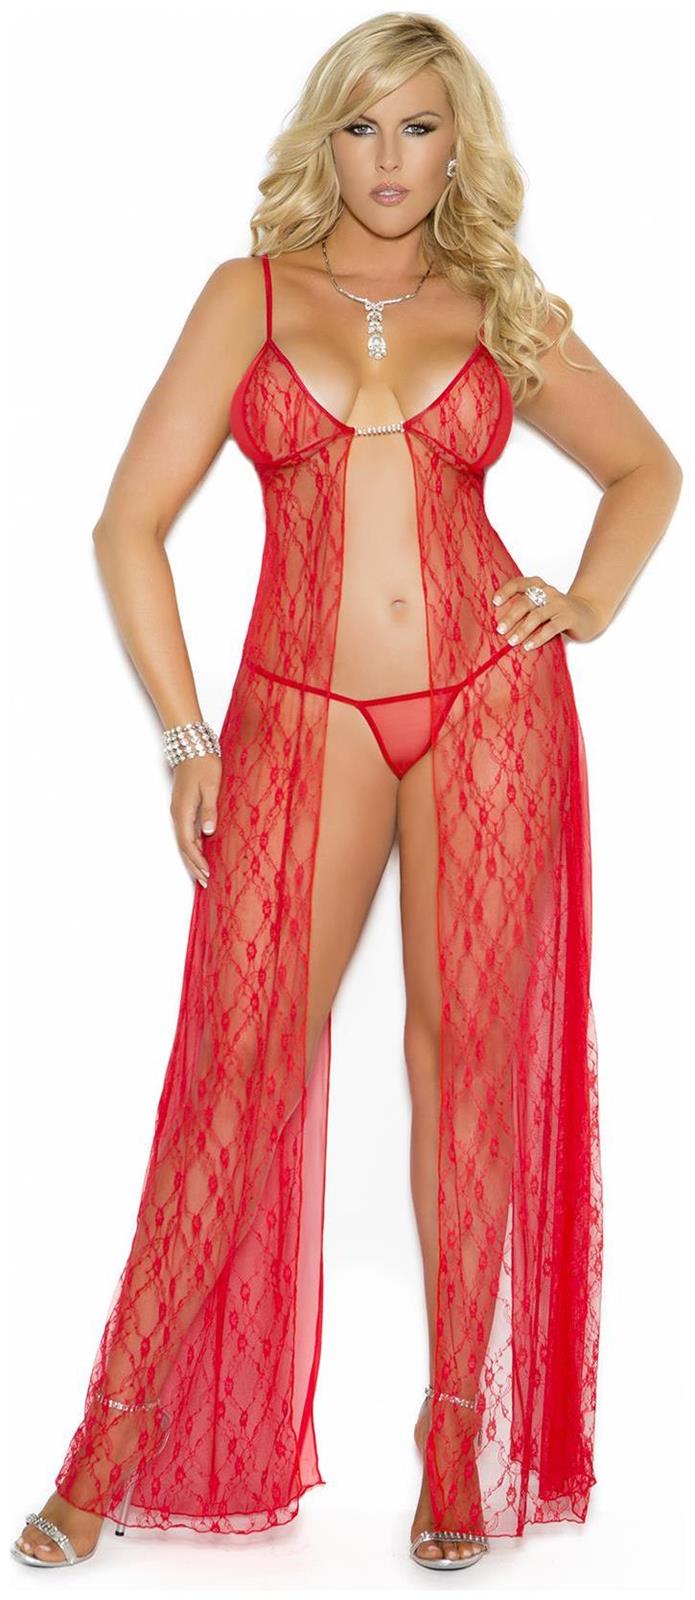 Elegant Moments Women's FLYAWAY GOWN AND G-STRING - RED - 1X for Valentines Day